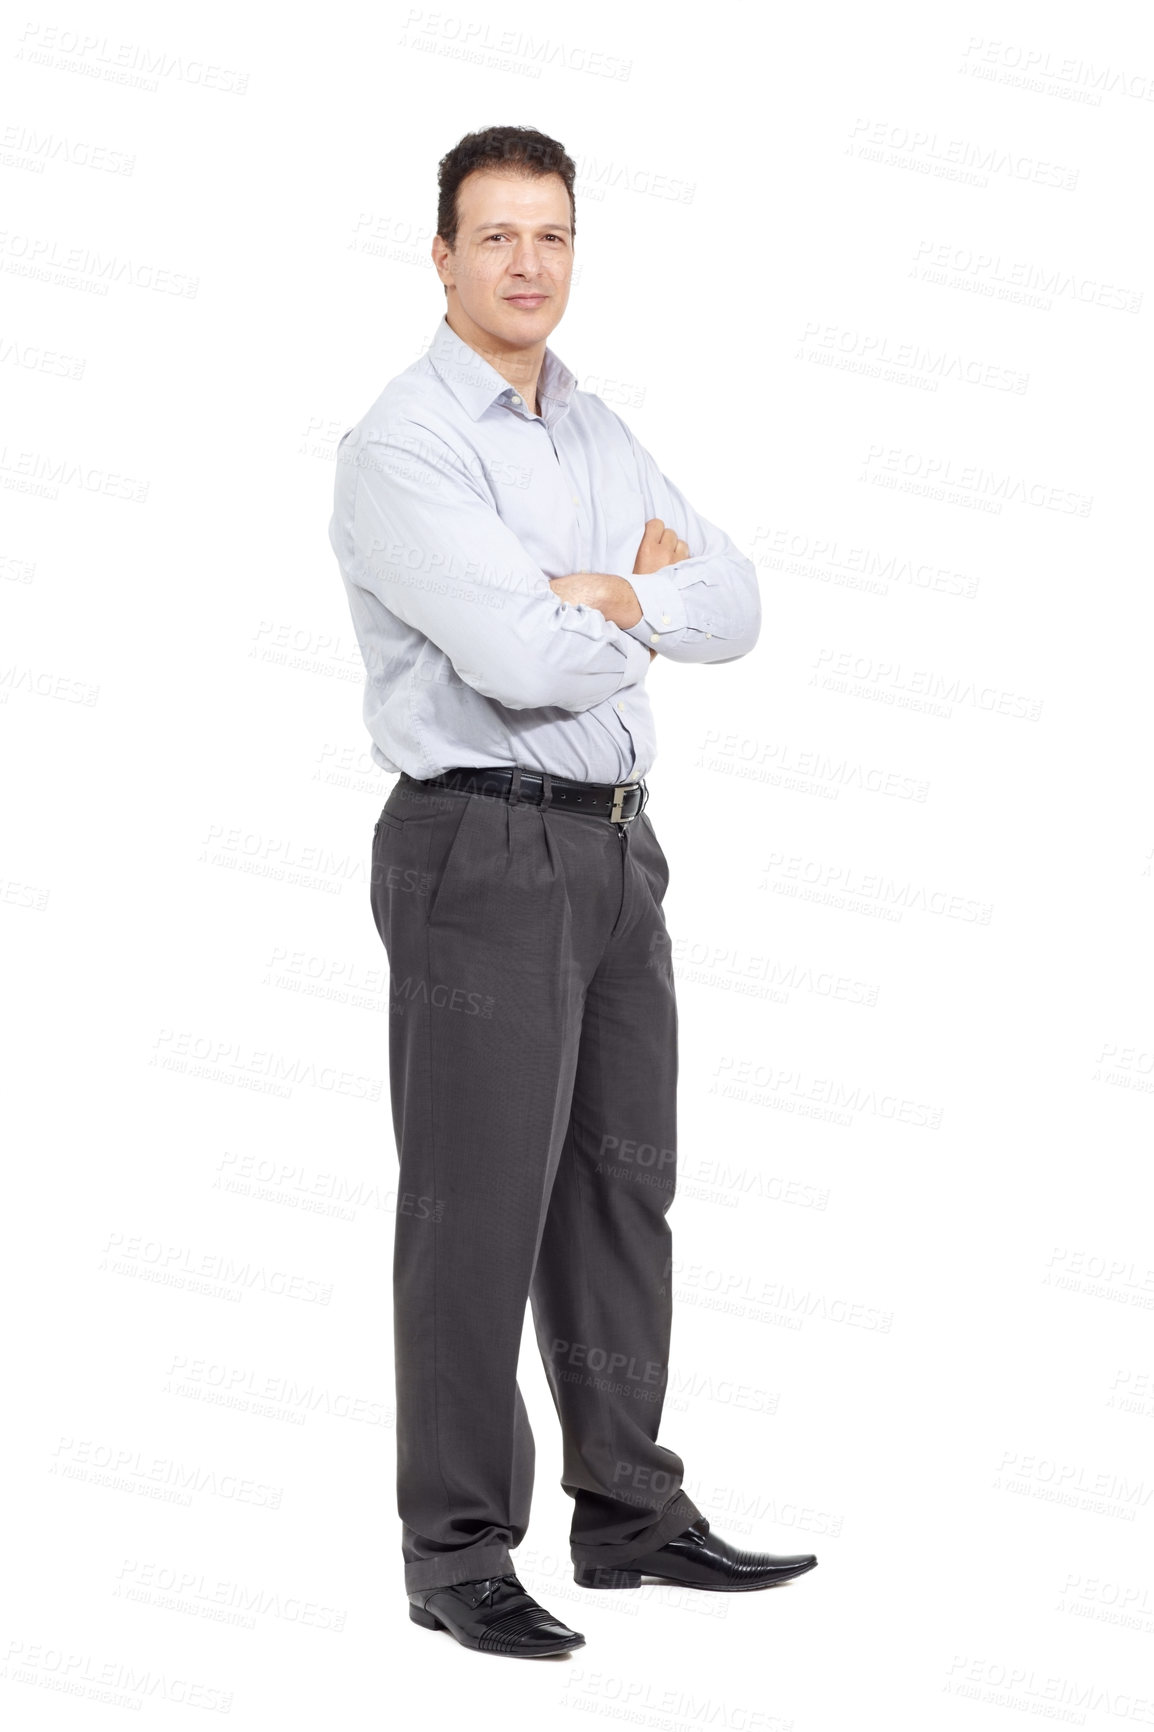 Buy stock photo Full length studio shot of a smiling man standing with his arms folded isolated on white